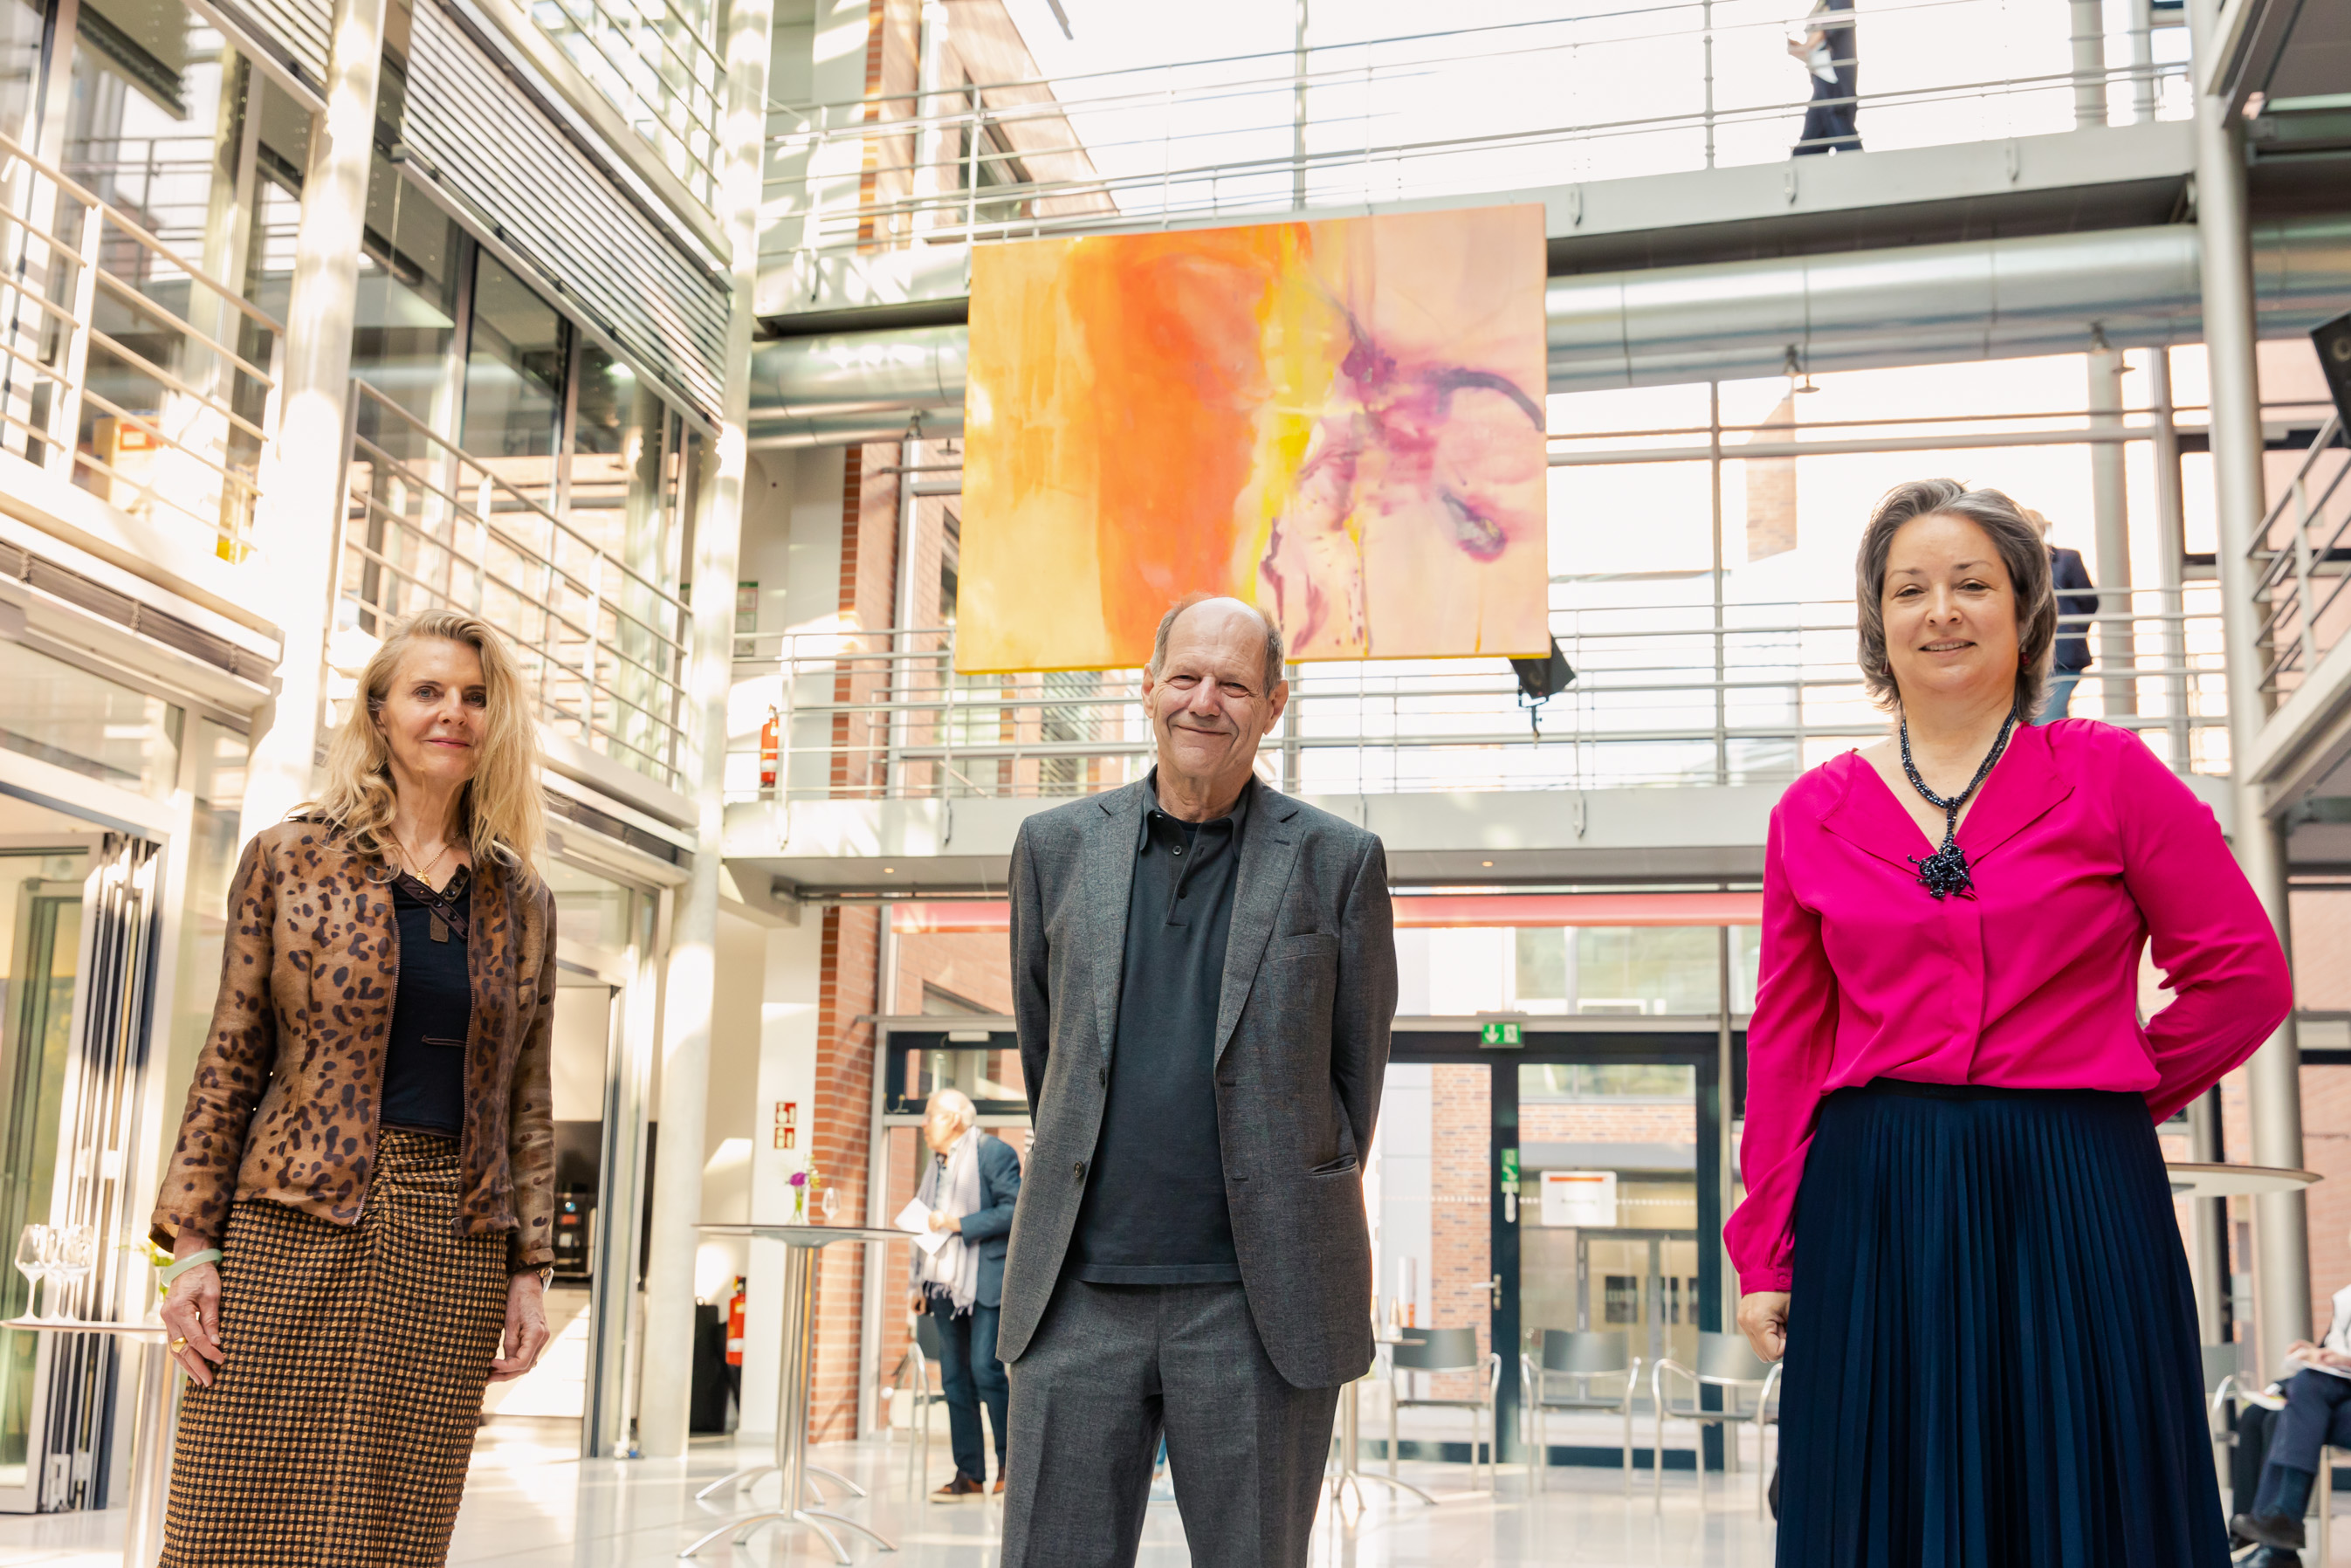  Picture of the Opening of the Exhibition of Petra Lemmerz with the artist herself, Michael Stoeber, art historian, and Eva Kienle standing in the Biotechnikum in Einbeck